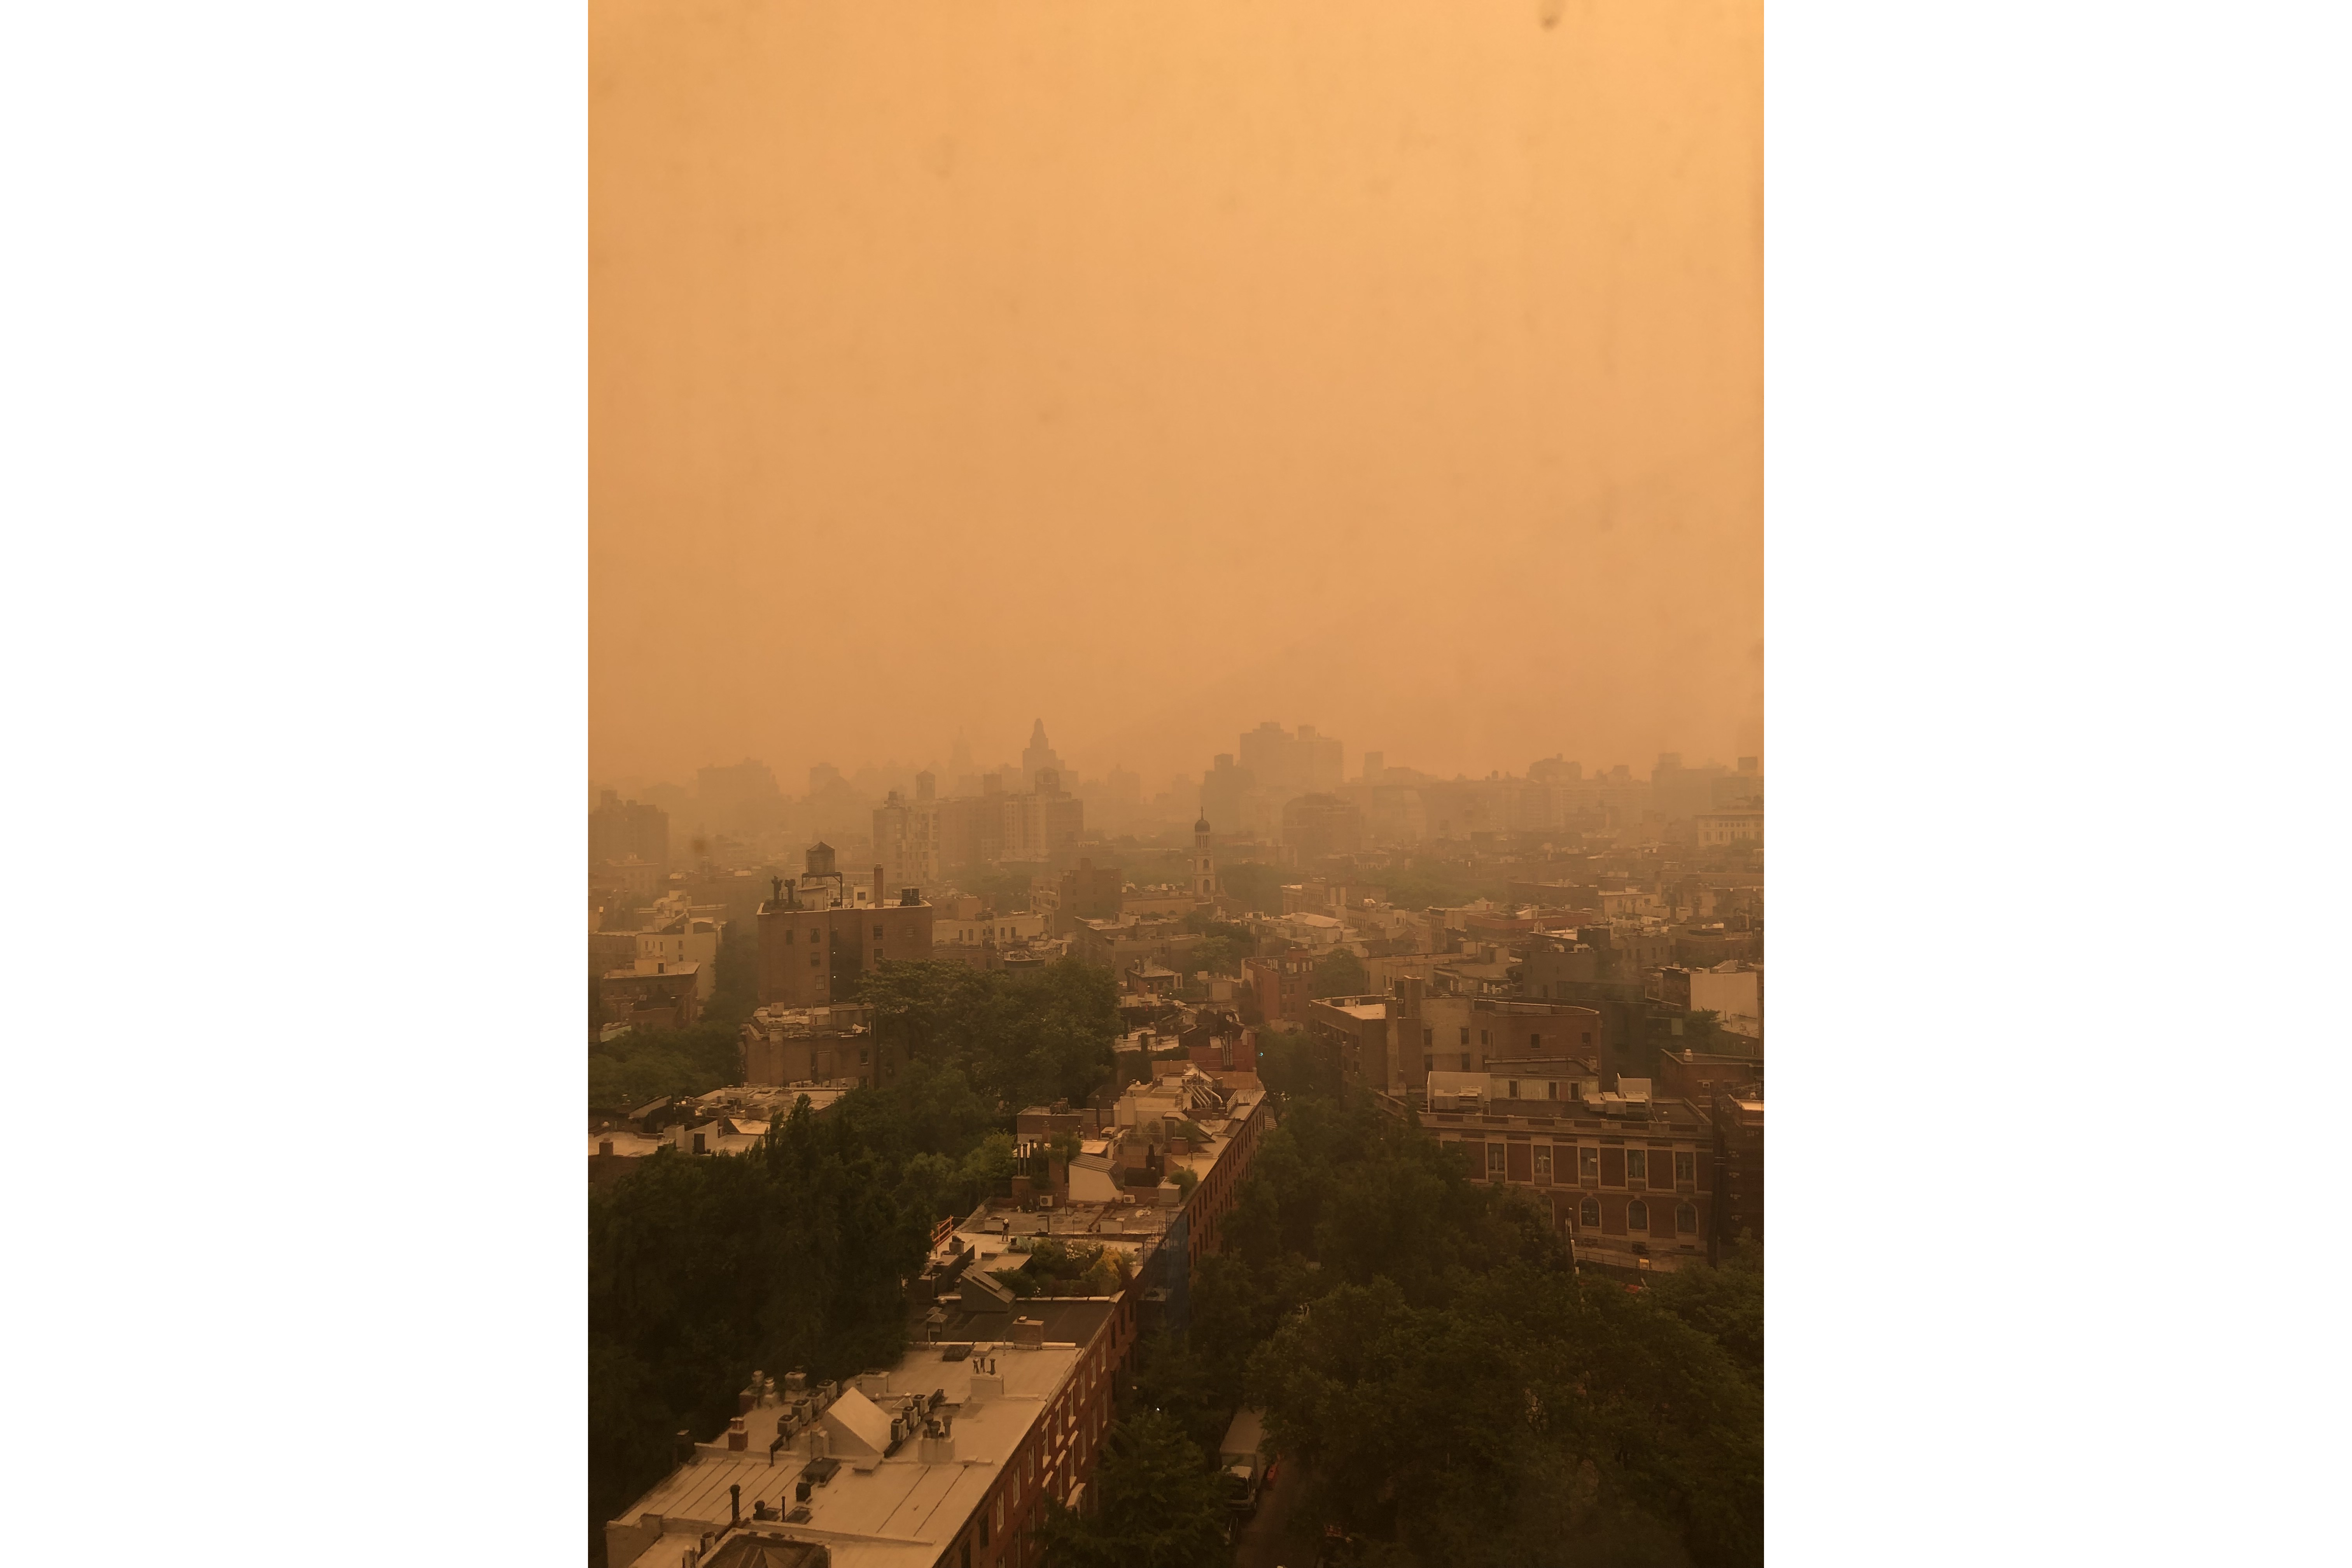 Smoggy West Village